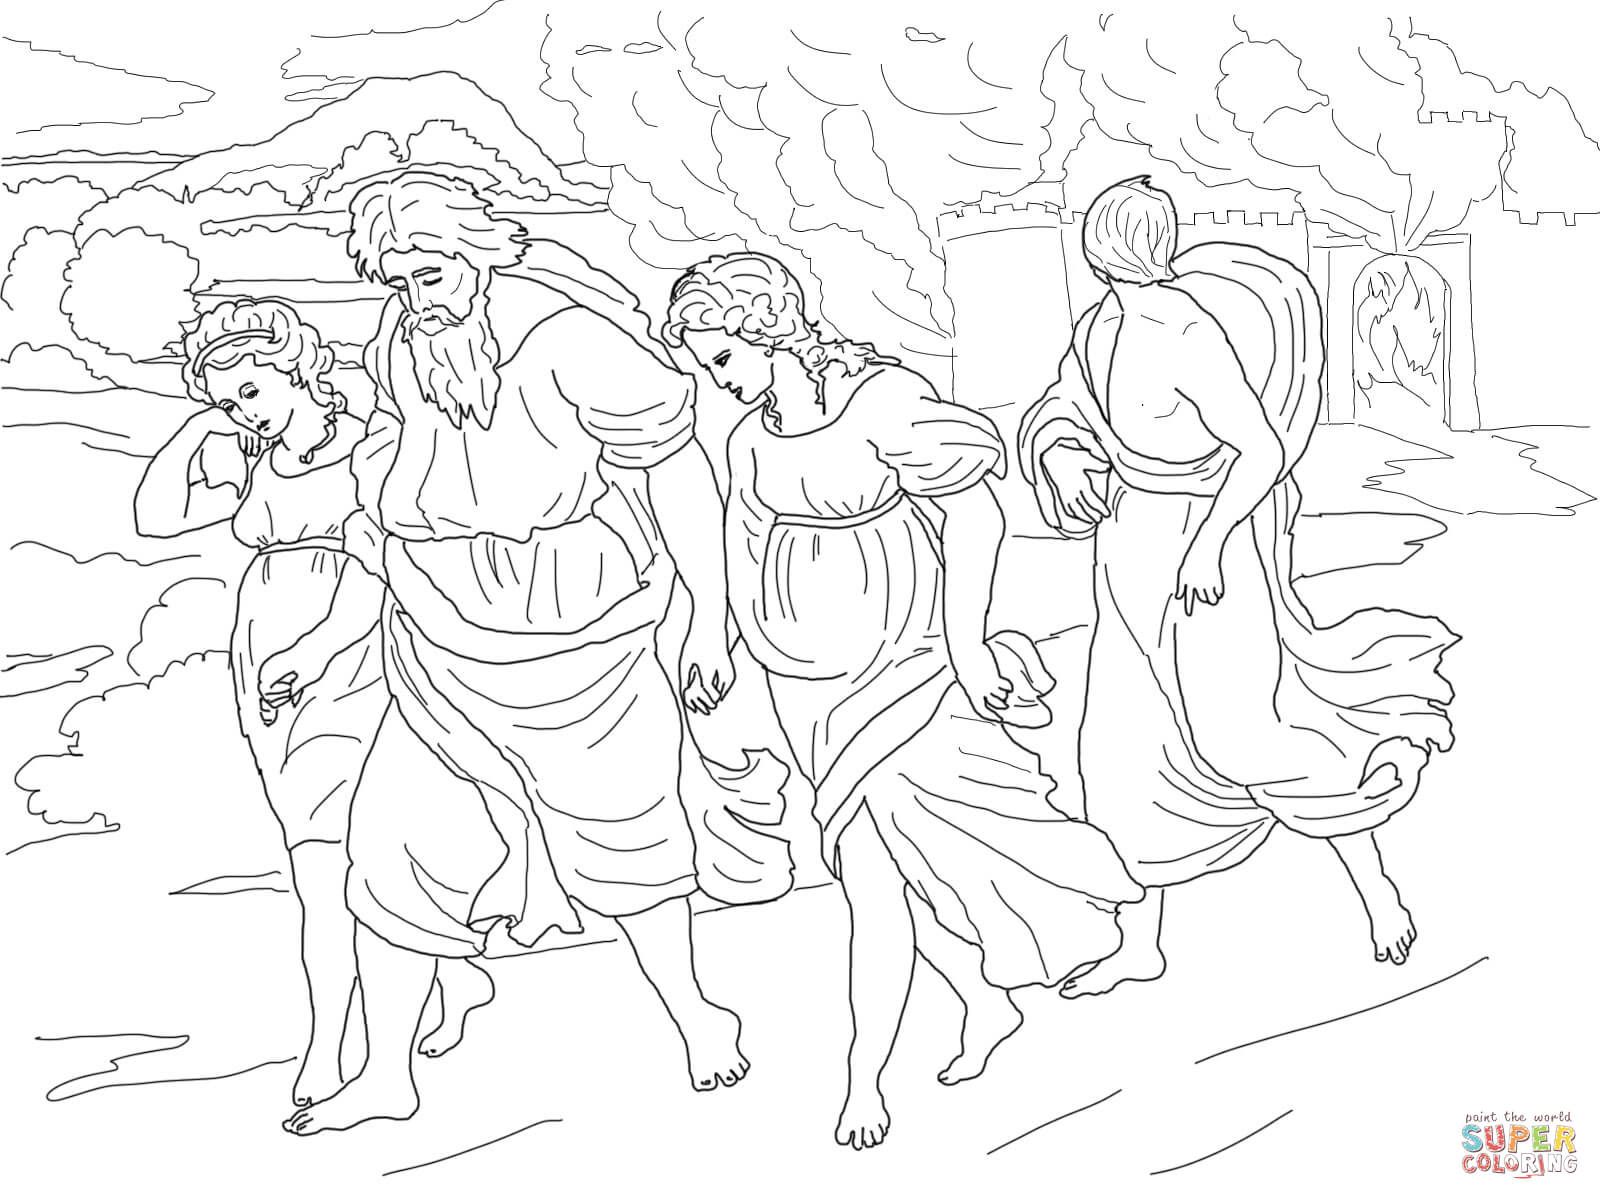 Lot and his daughters fleeing the destruction of sodom and gomorrah coloring page from abraham category sâ bible coloring pages bible crafts sodom and gomorrah